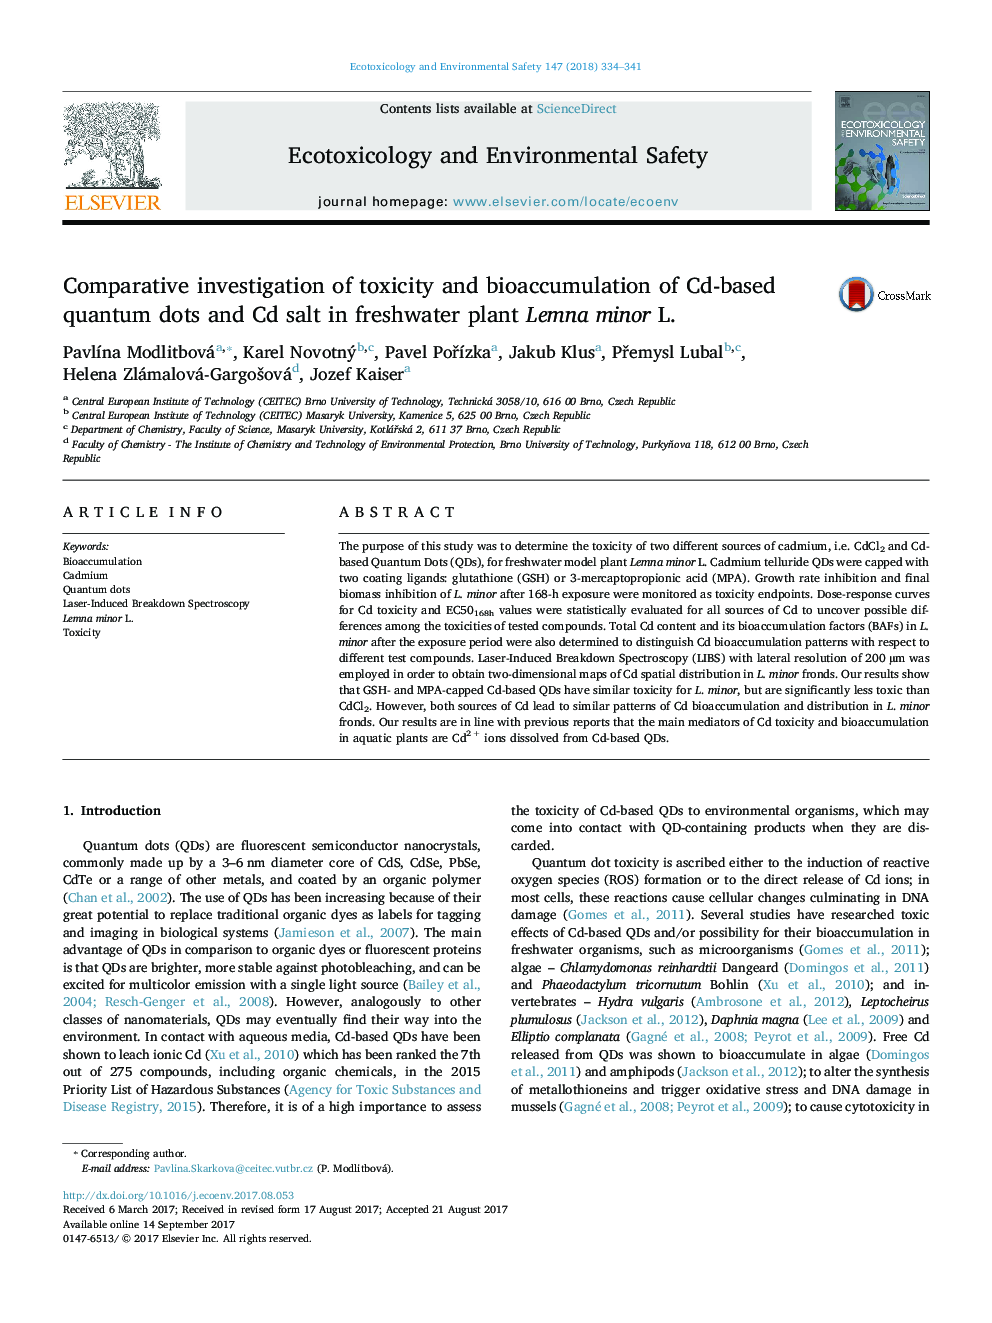 Comparative investigation of toxicity and bioaccumulation of Cd-based quantum dots and Cd salt in freshwater plant Lemna minor L.